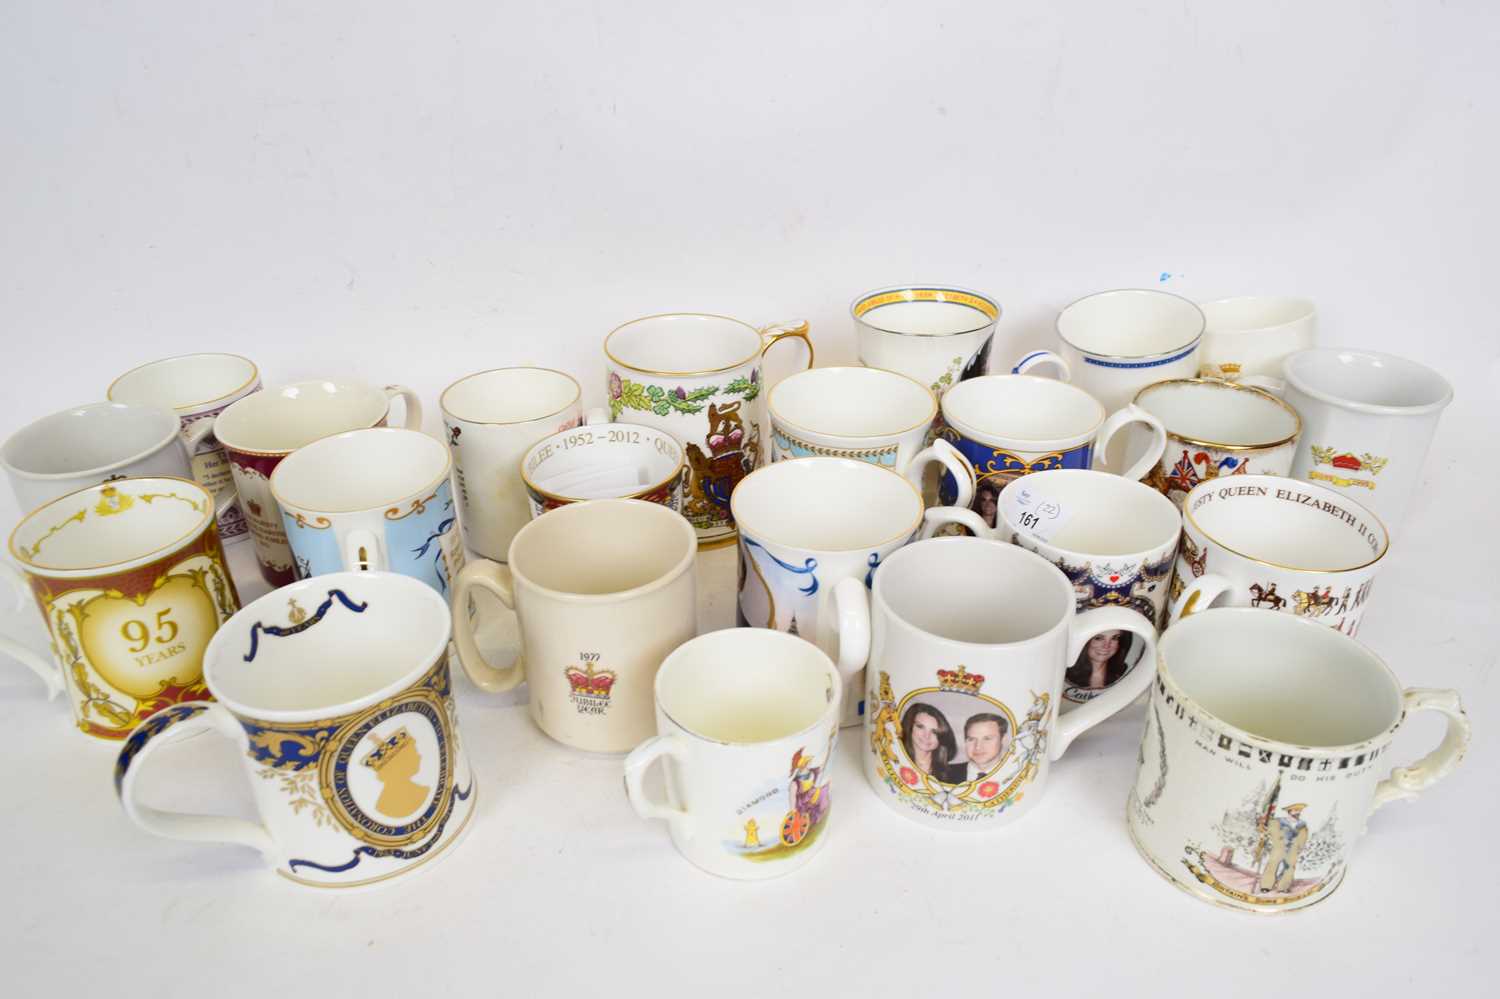 Collection of commemorative mugs, various Royalty and political figures (22) - Image 2 of 2